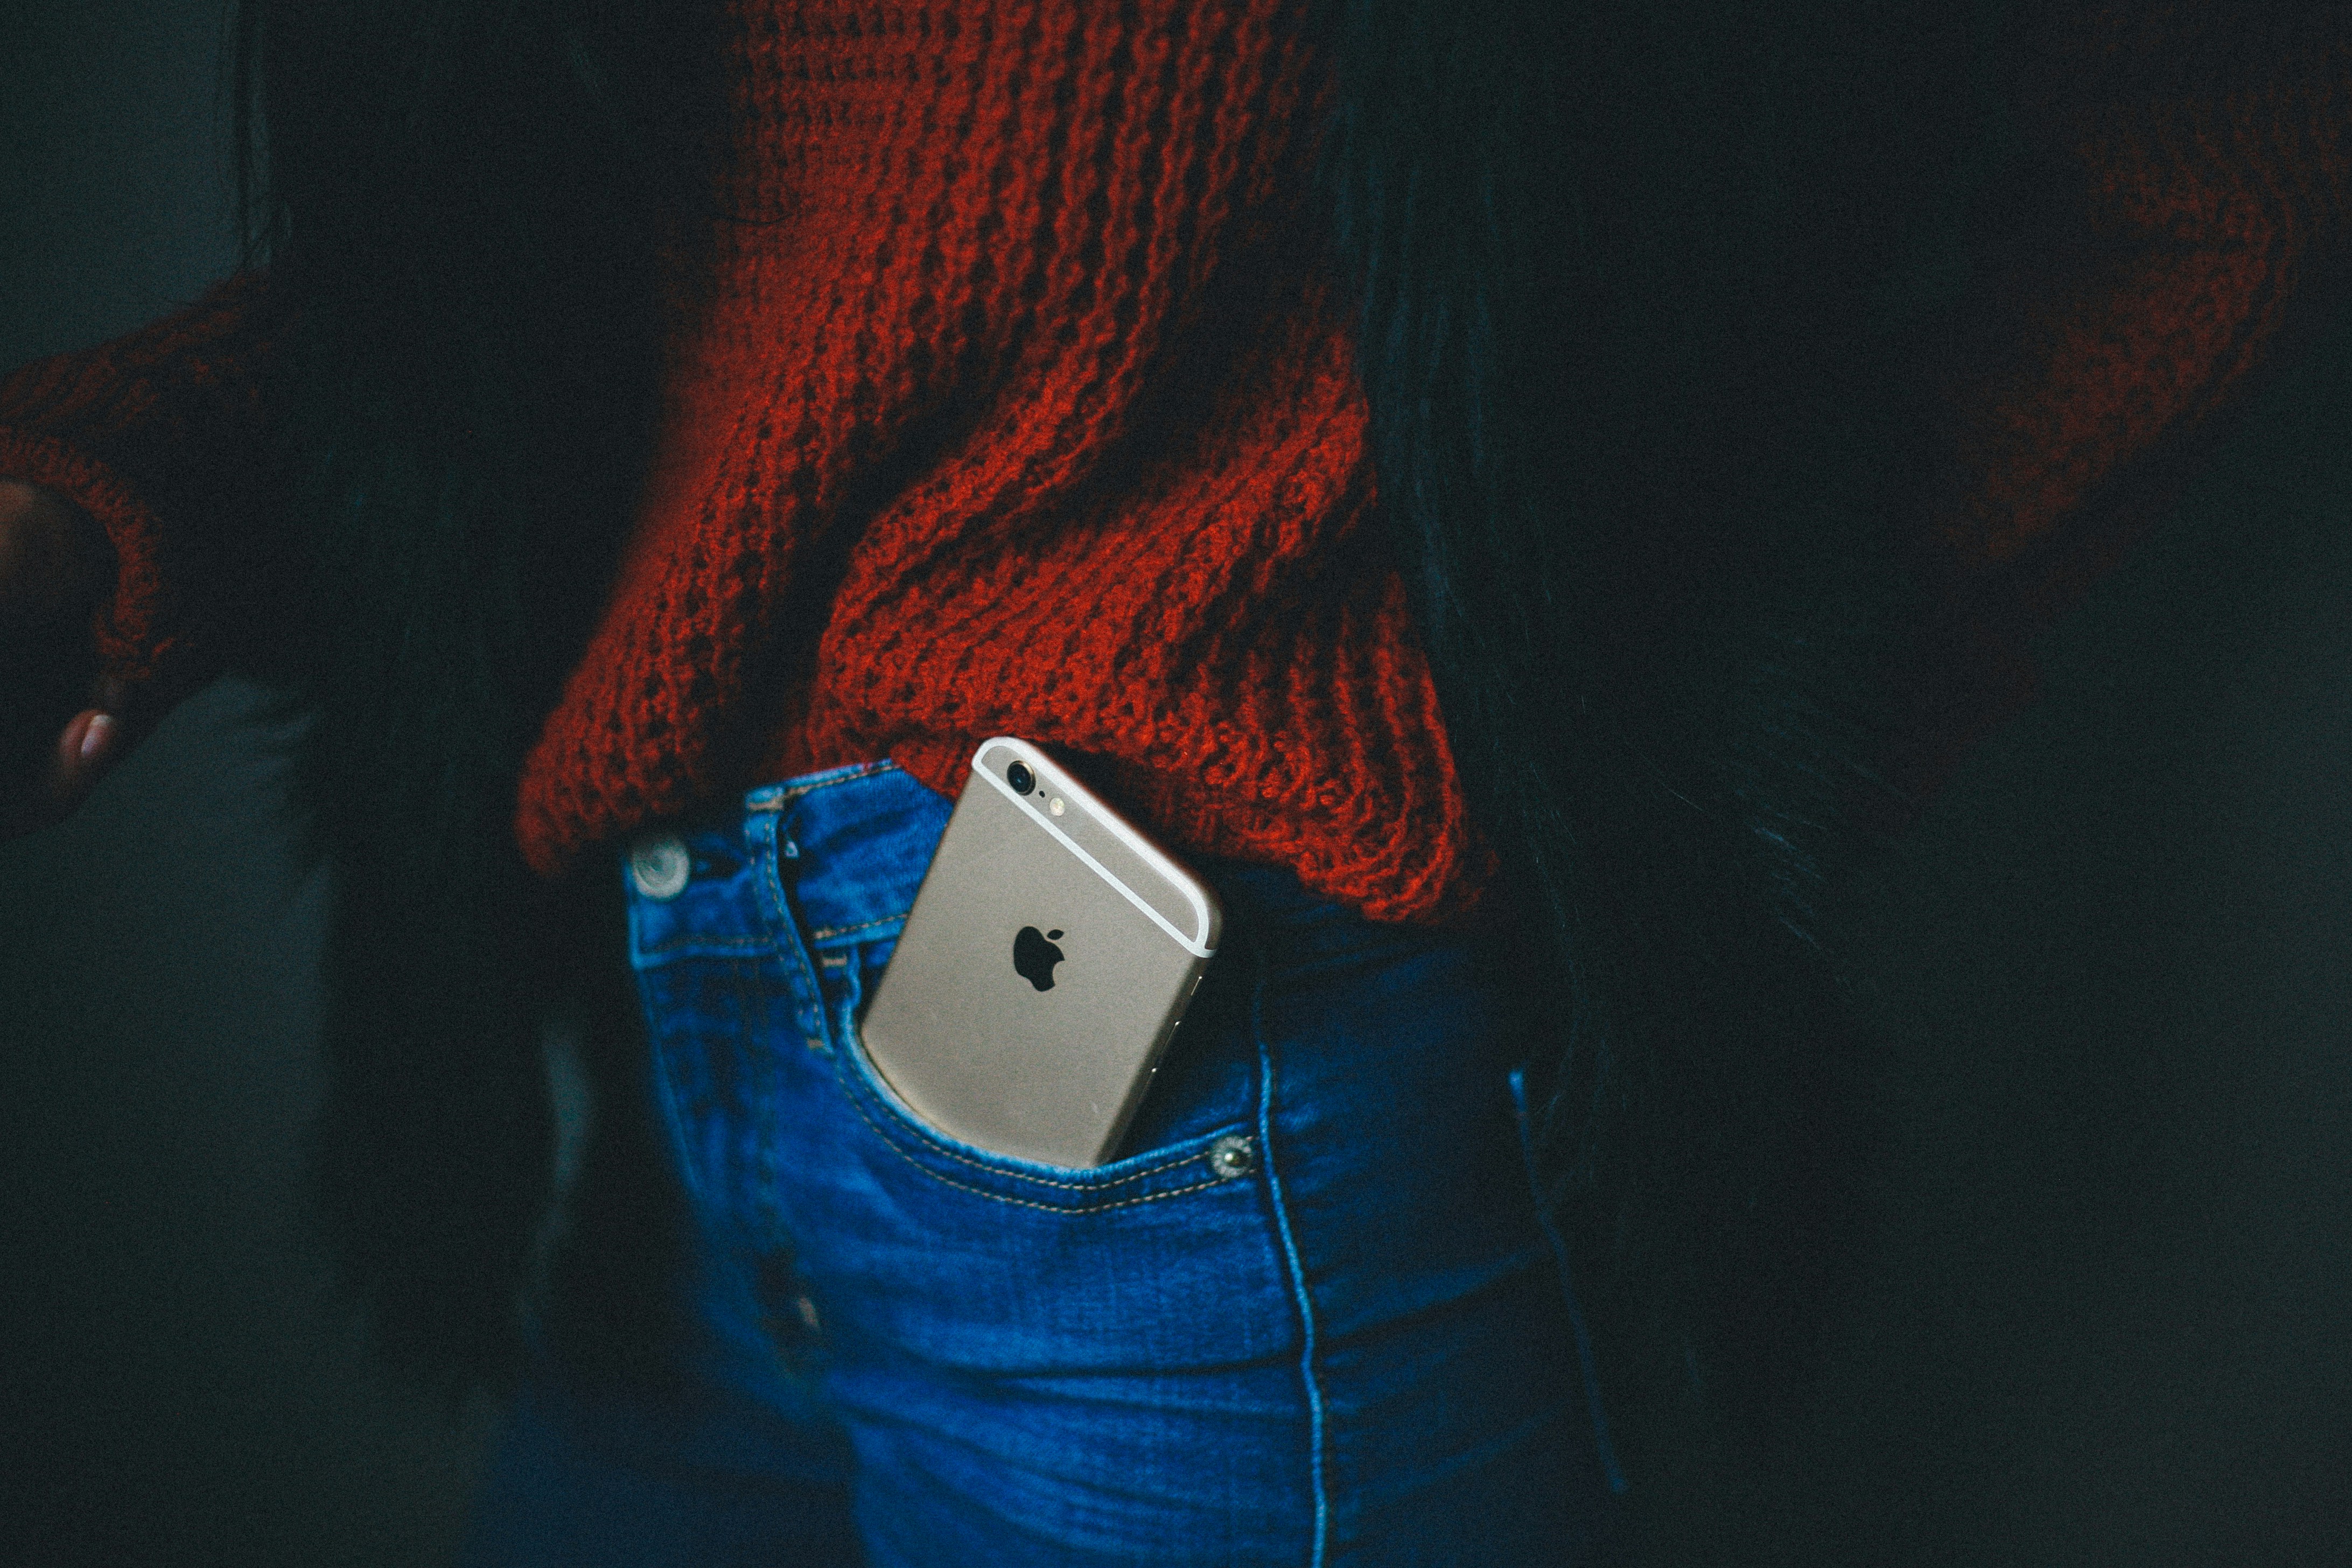 iPhone in a jeans pocket